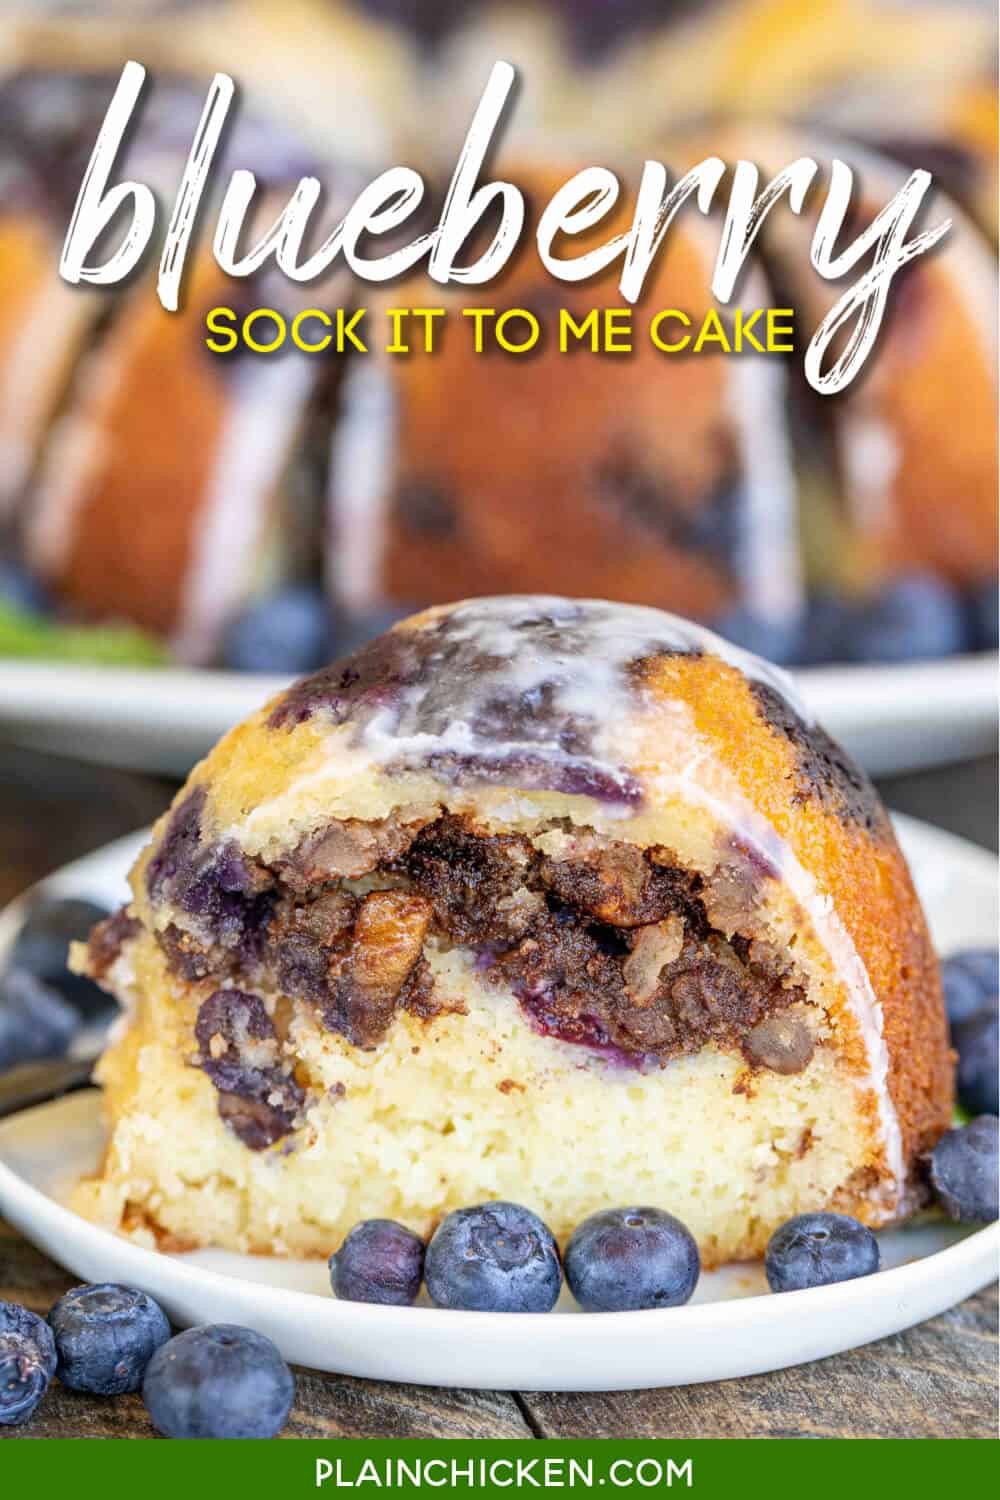 Blueberry Sock it to Me Cake - Plain Chicken